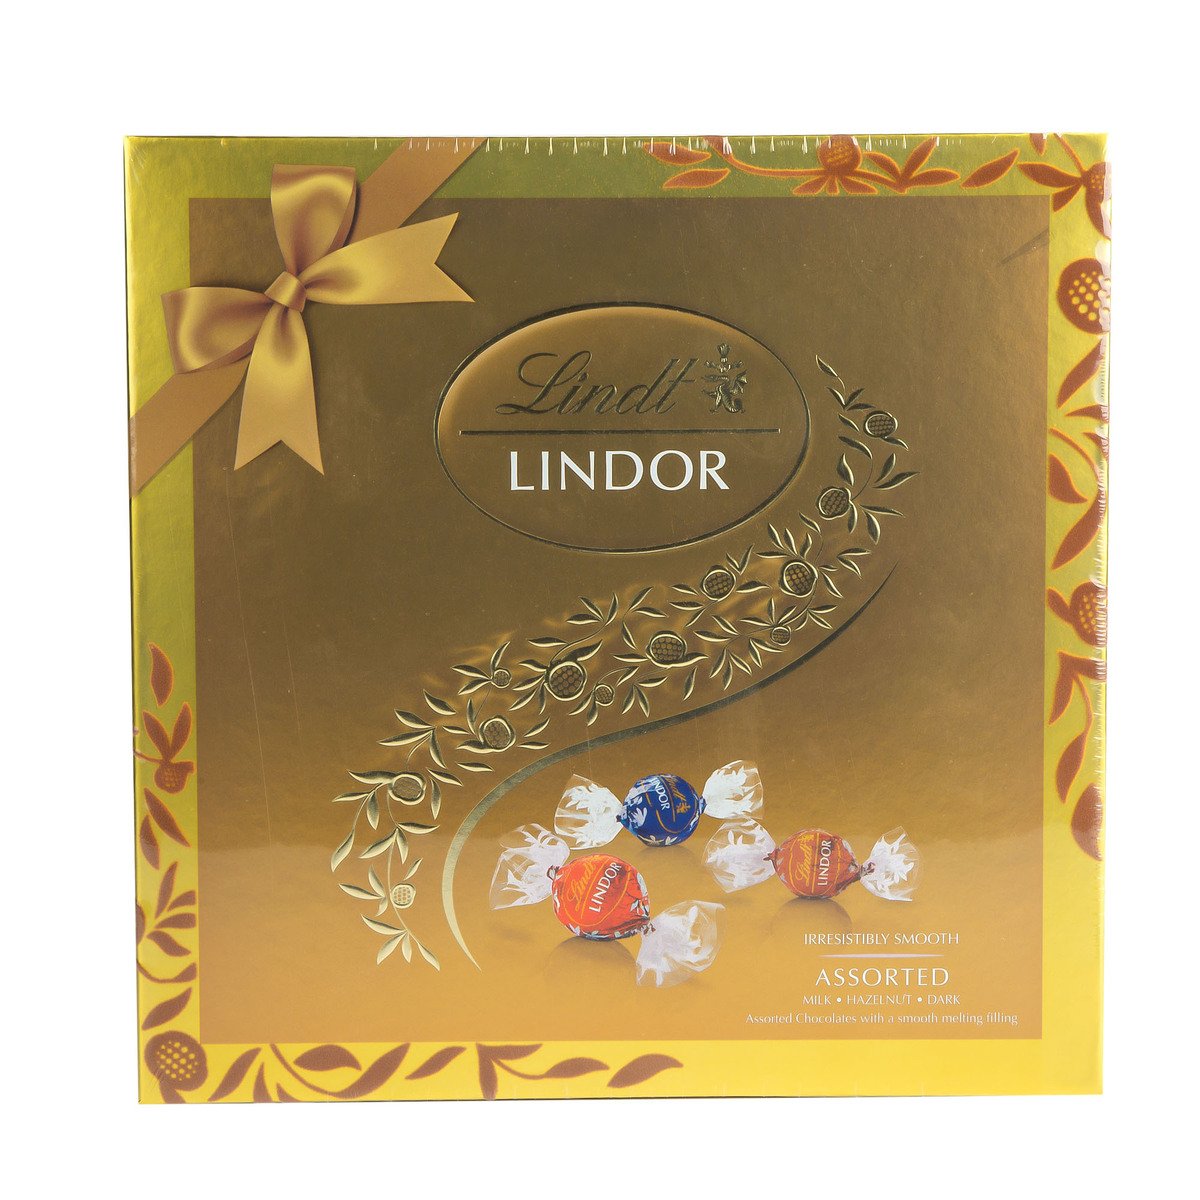 Lindt Lindor Irresistibly Smooth Chocolate Assorted 225 g